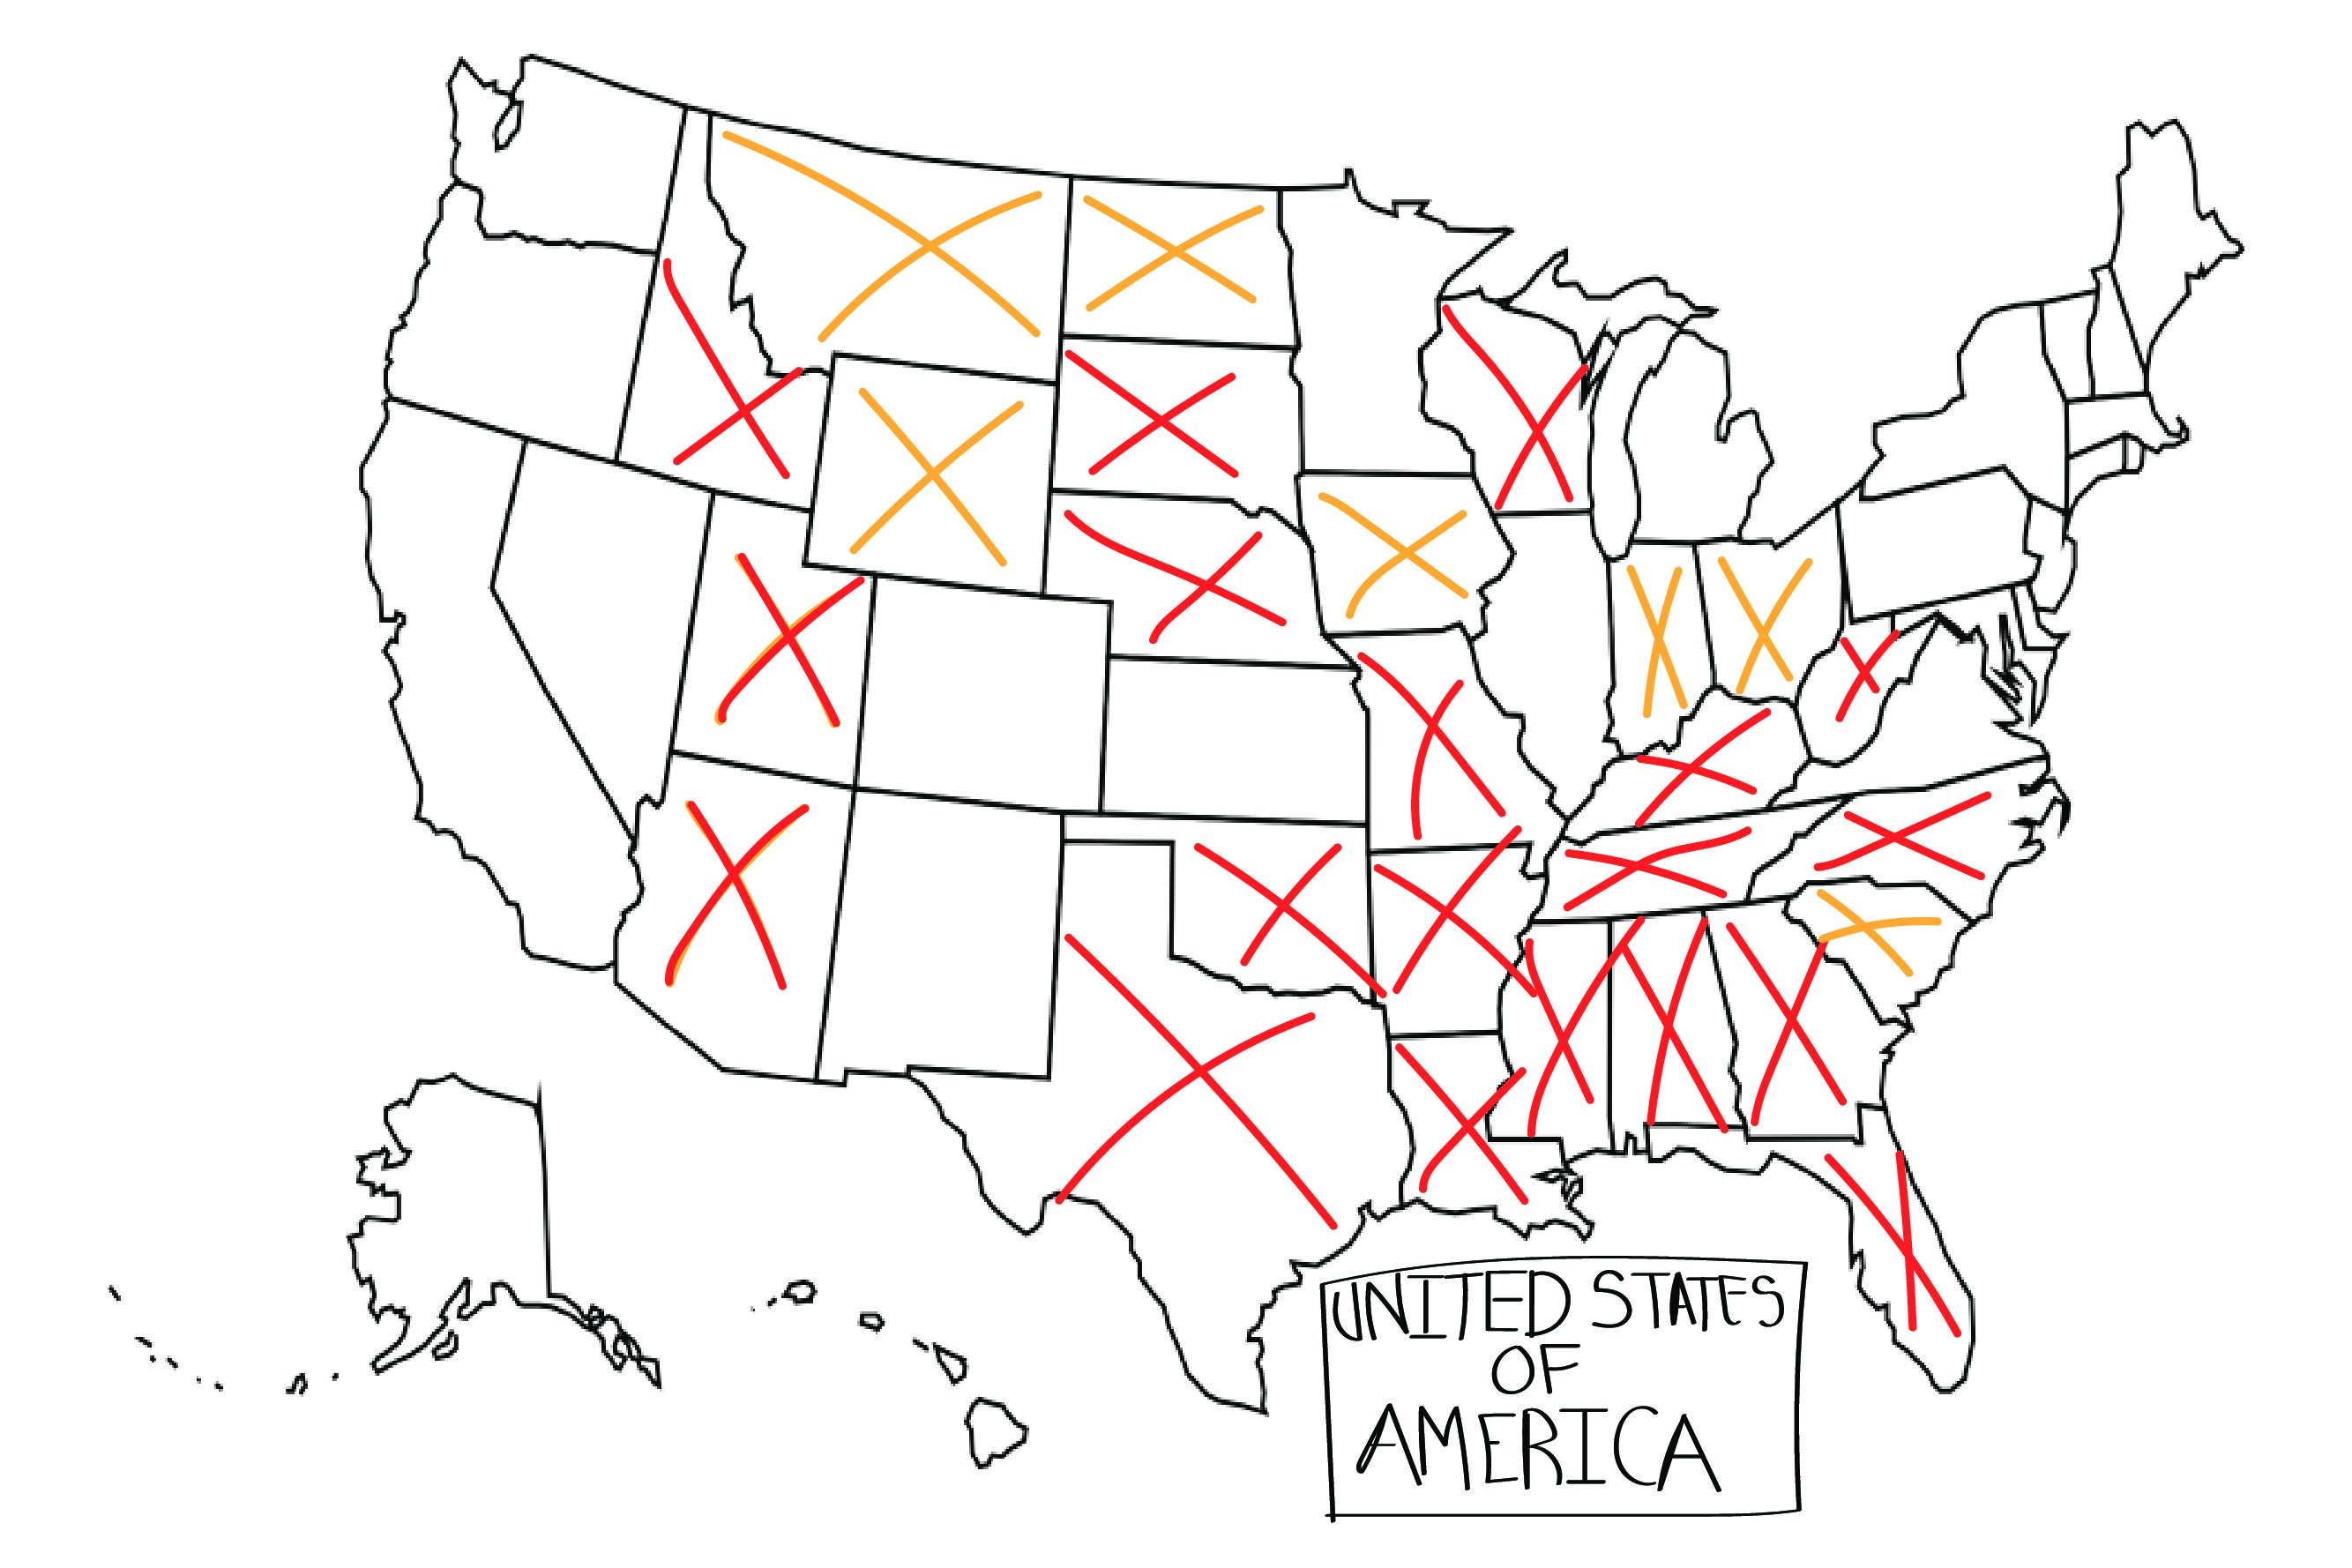 A map of the U.S. has states crossed out in orange or red. States with a red x have banned or heavily limited abortion, and states marked with orange an x have uncertain legal status regarding abortion. States where abortion is legal are left blank. My friends and I  have made maps like this after the Supreme Court overturned Roe v. Wade, the landmark case legalizing abortion, on June 24, 2022. At least 13 states have banned abortion as of December 2022. 